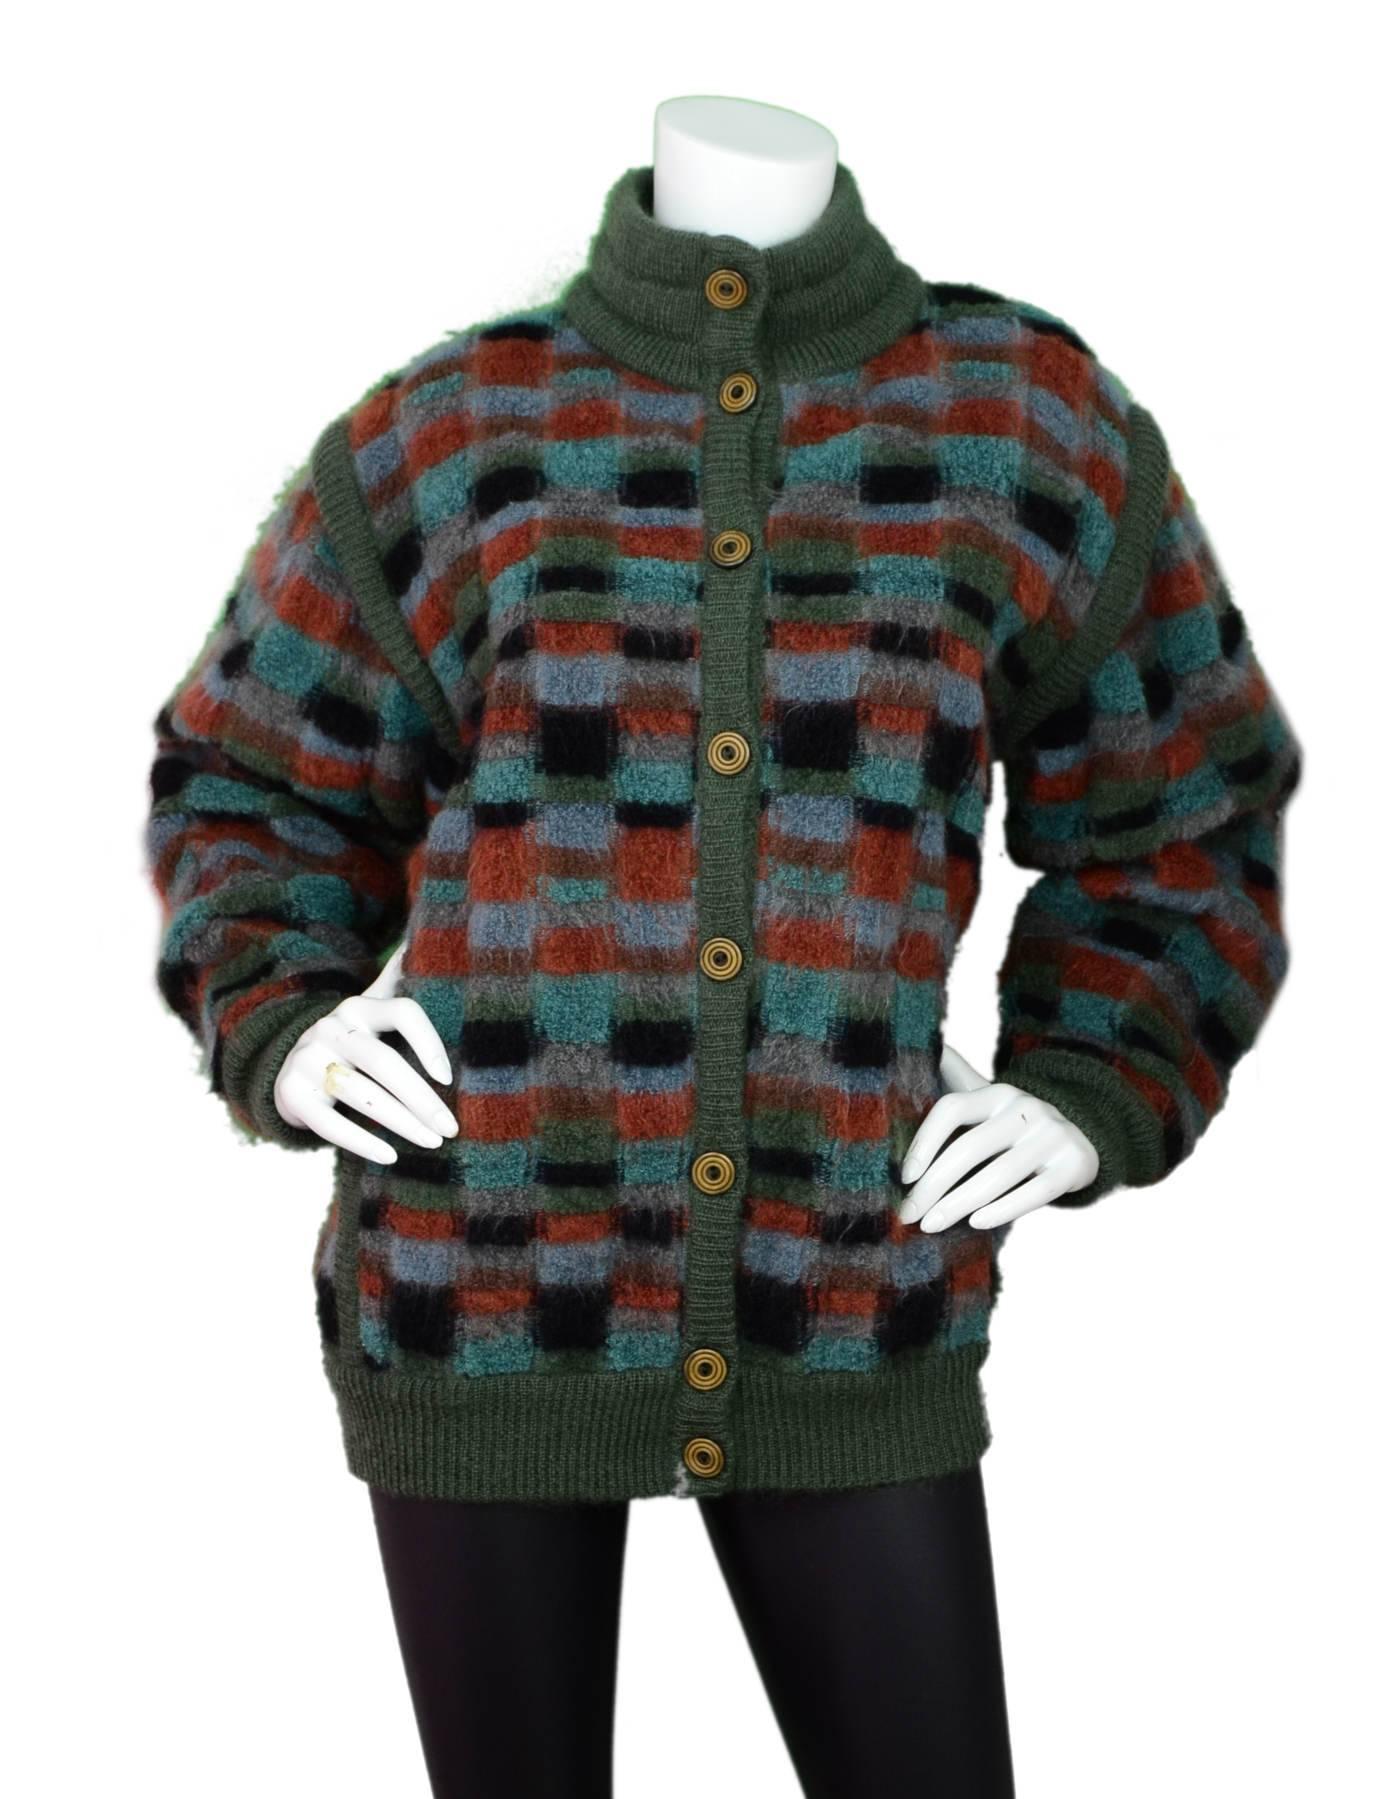 Missoni Multicolor Reversible Sweater Jacket

Made In: Italy
Color: Green, blue, black, tan, grey
Composition: Not listed, feels like wool blend
Lining: Reversible
Closure/Opening: Button closure
Exterior Pockets: Slit pockets / flap pockets
Overall